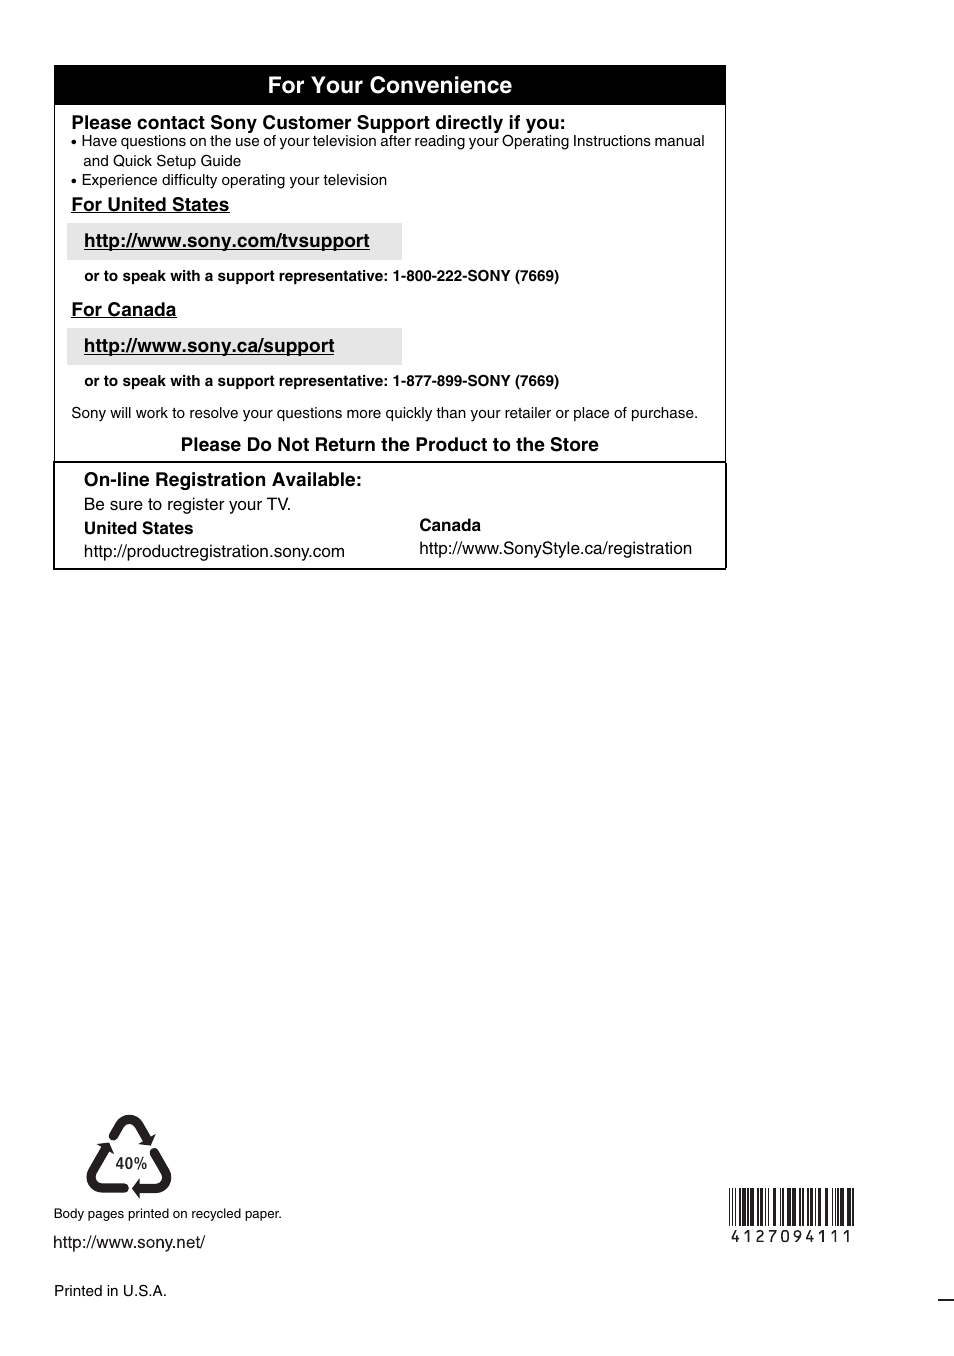 For your convenience | Sony KDL-52XBR7 User Manual | Page 60 / 60